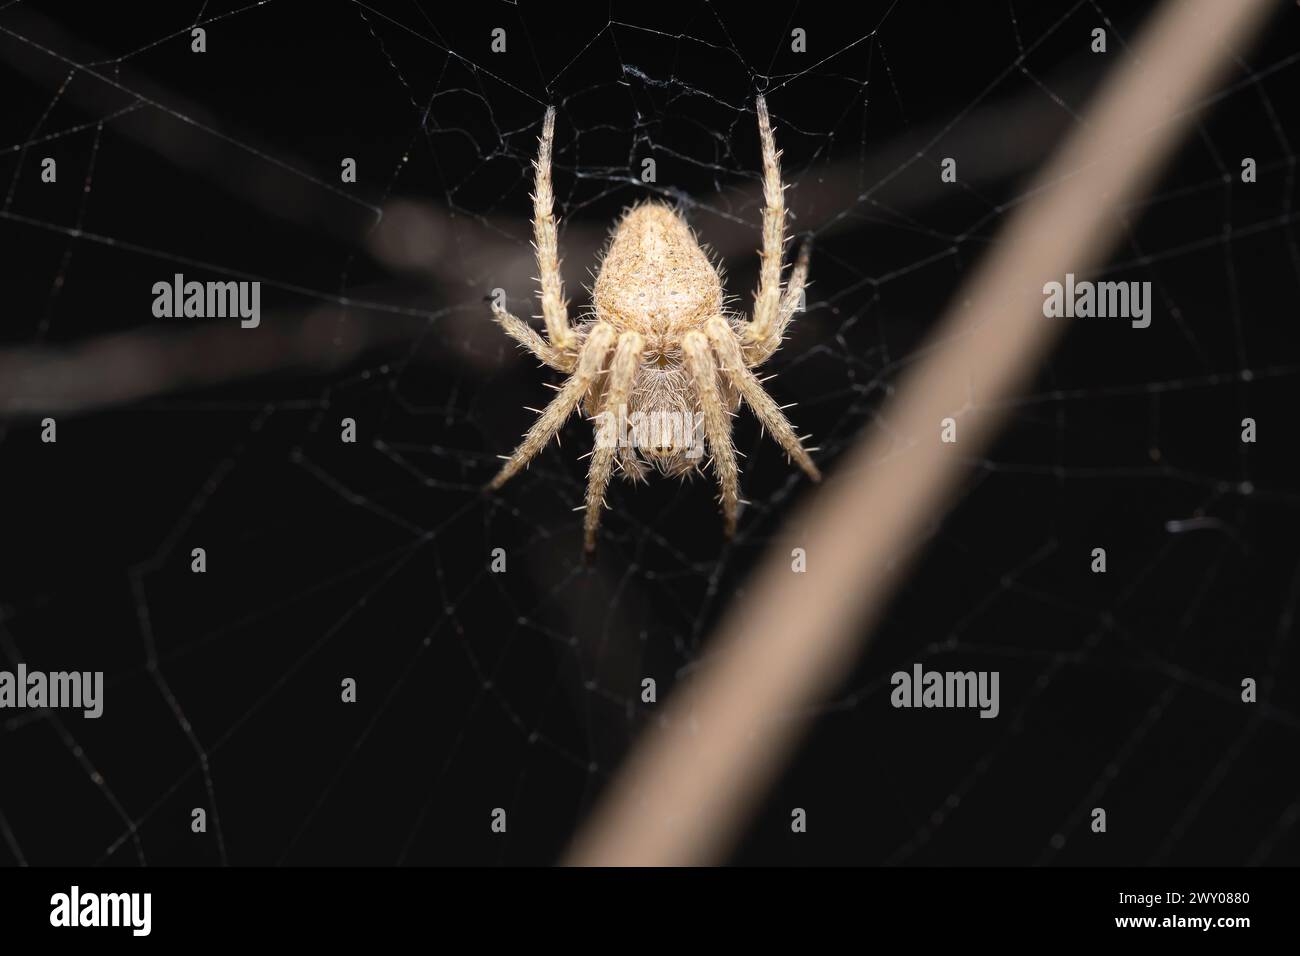 A detailed close-up of a Neoscona mukherjee spider poised on its intricate web. Stock Photo